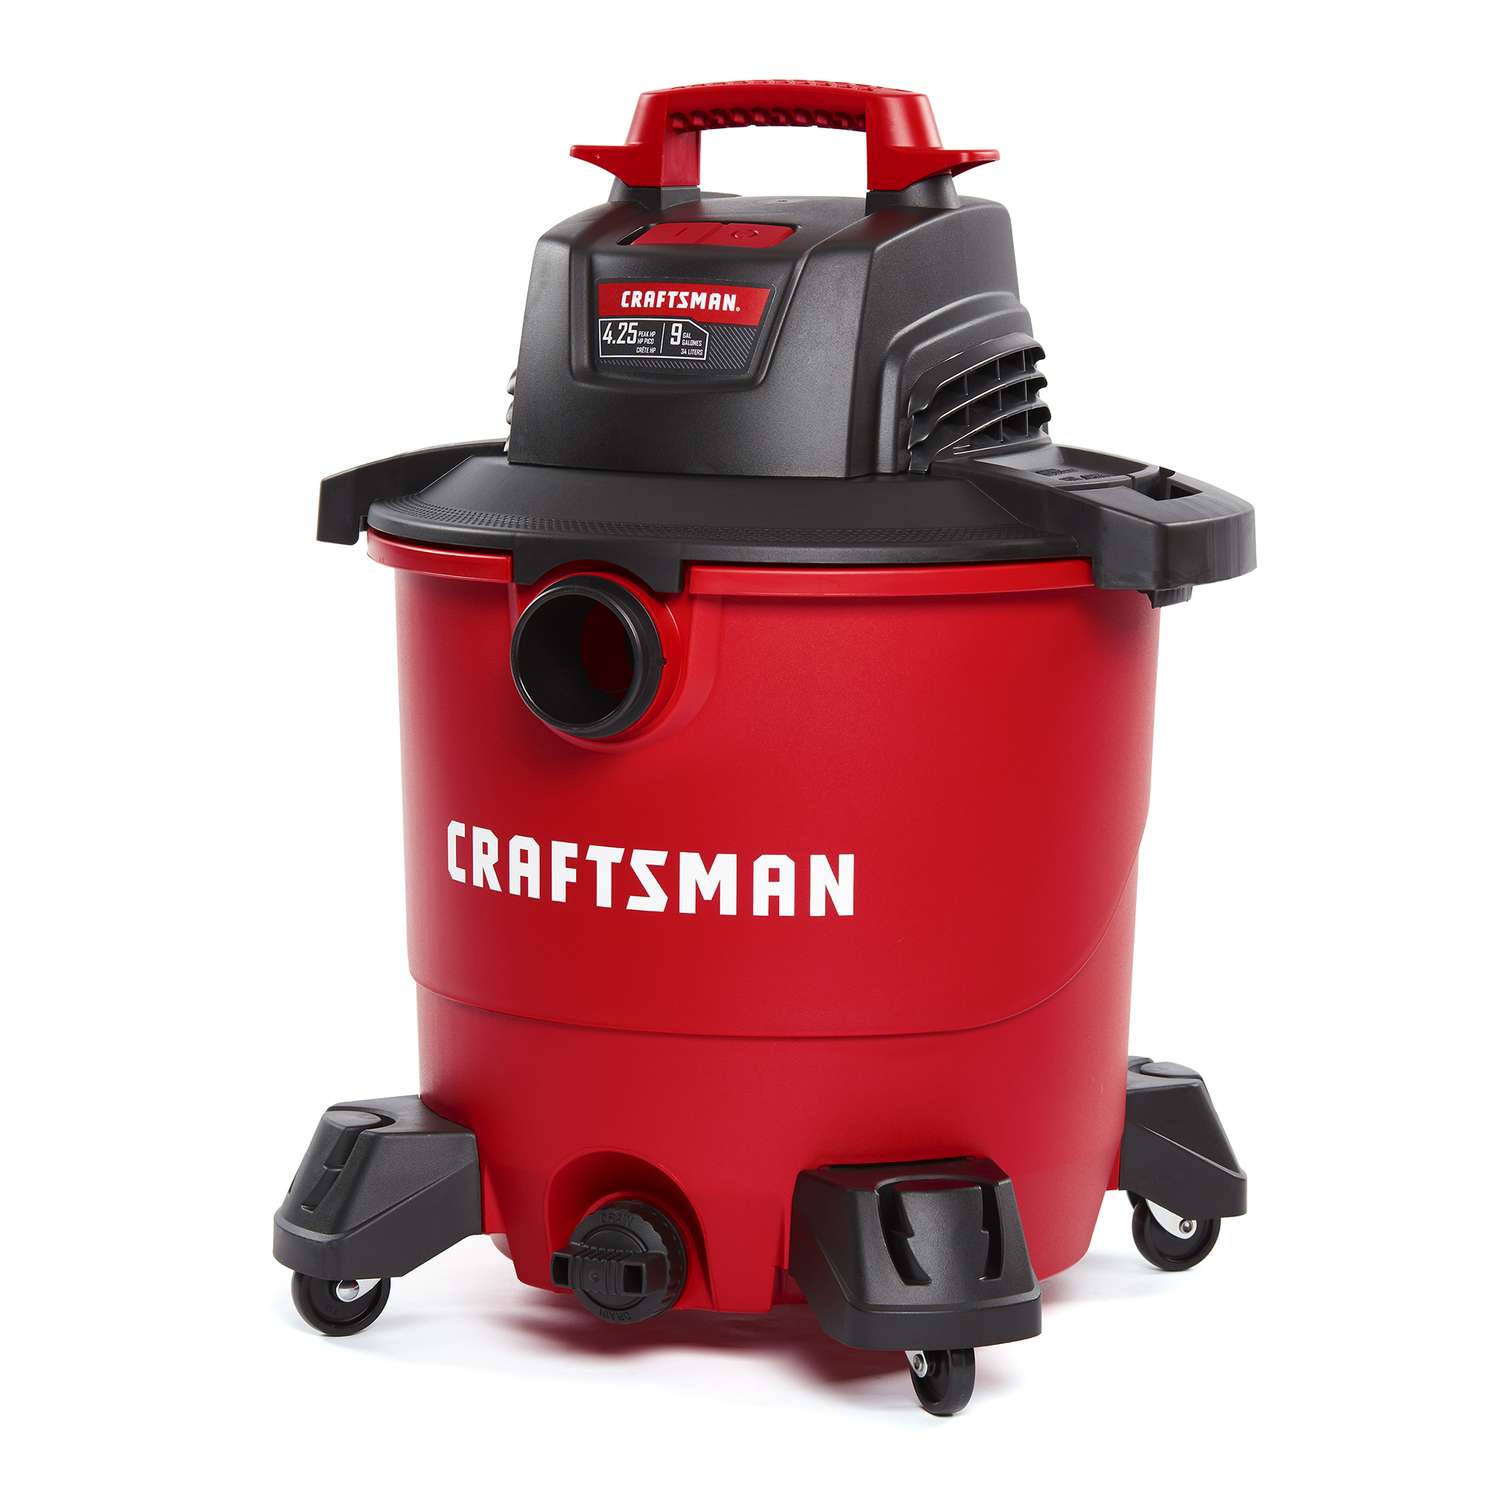 Craftsman 9 gal. Corded Wet/Dry Vacuum 8.3 amps 120 volt 4.25 hp Red 16 lb. $69.99